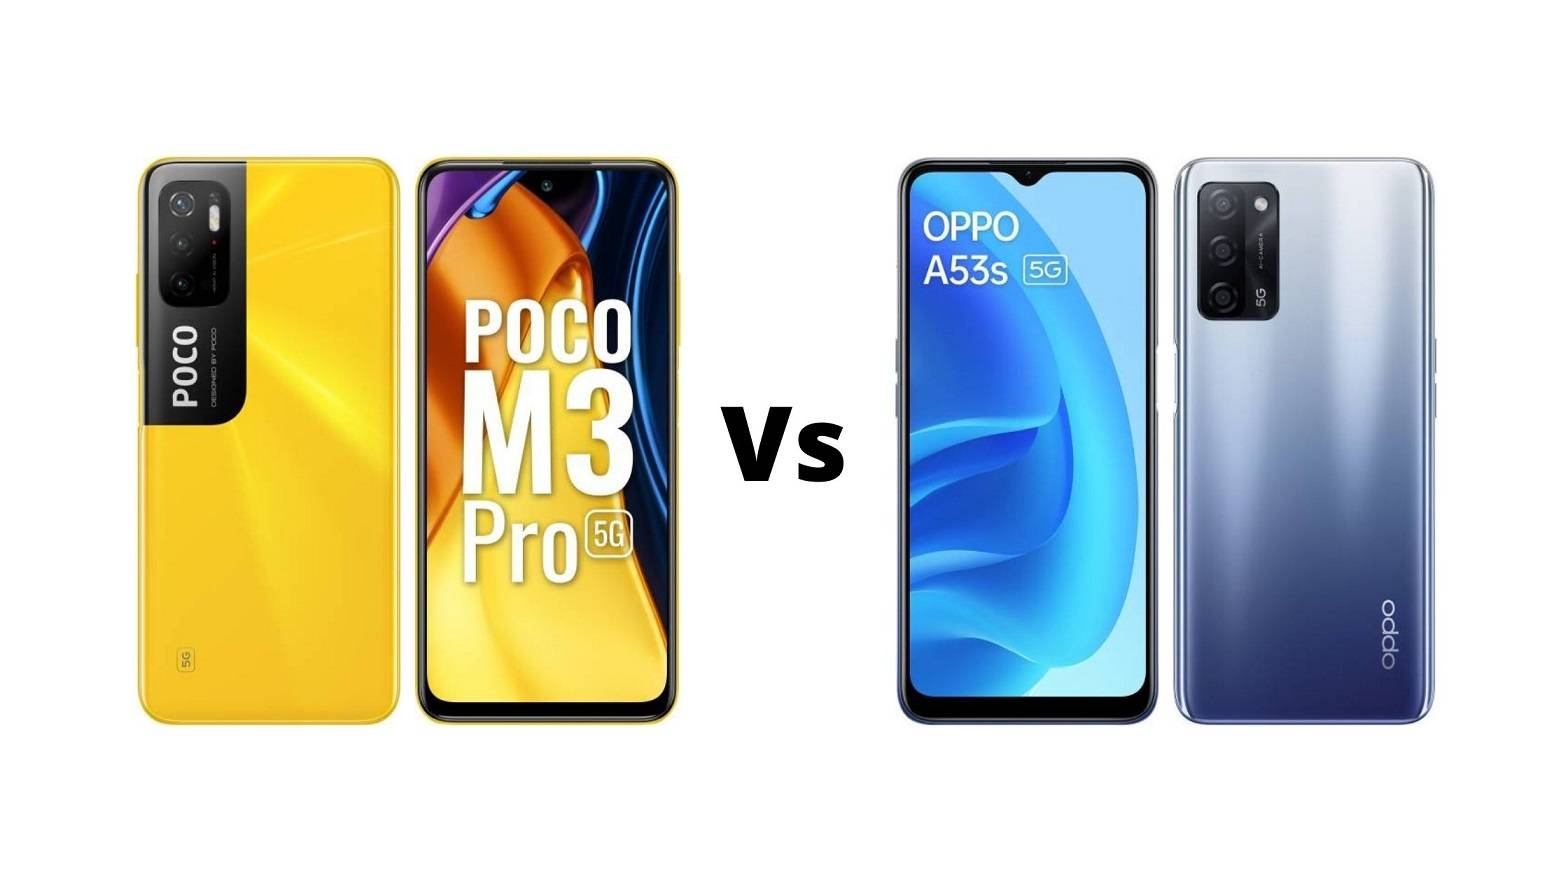 Poco M3 Pro 5G Vs Oppo A53s 5G Which one should you buy